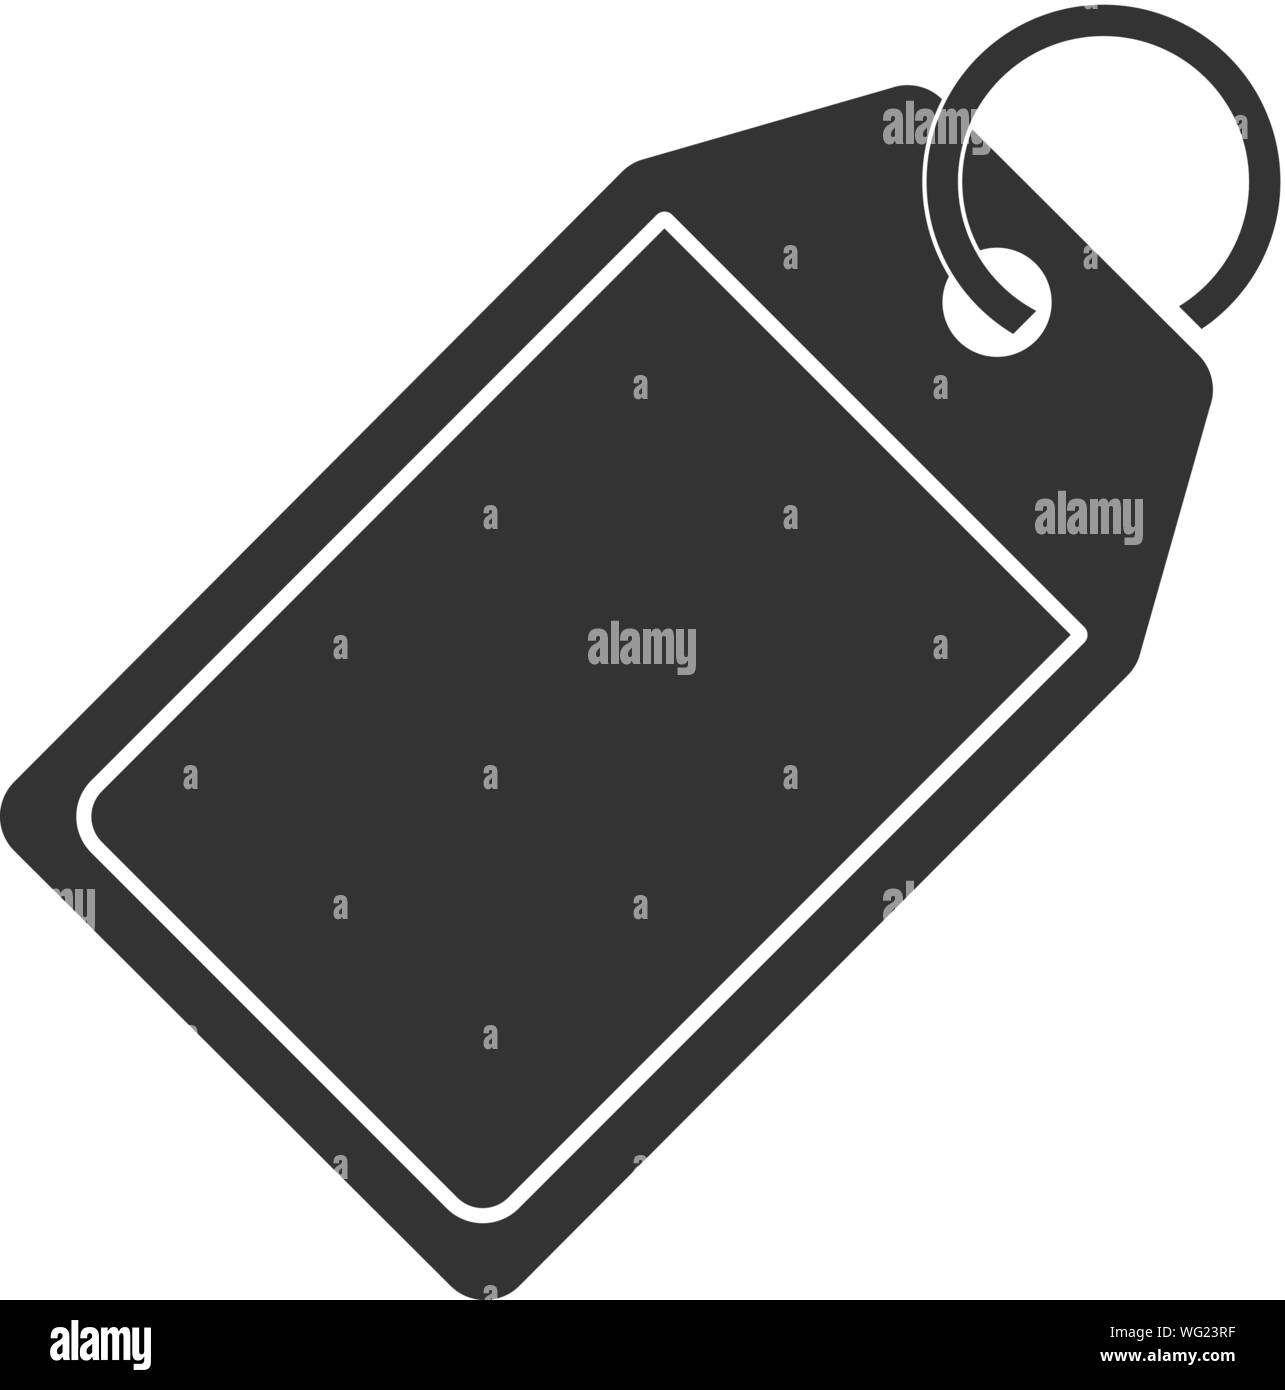 simple flat black and white price tag vector illustration Stock Vector